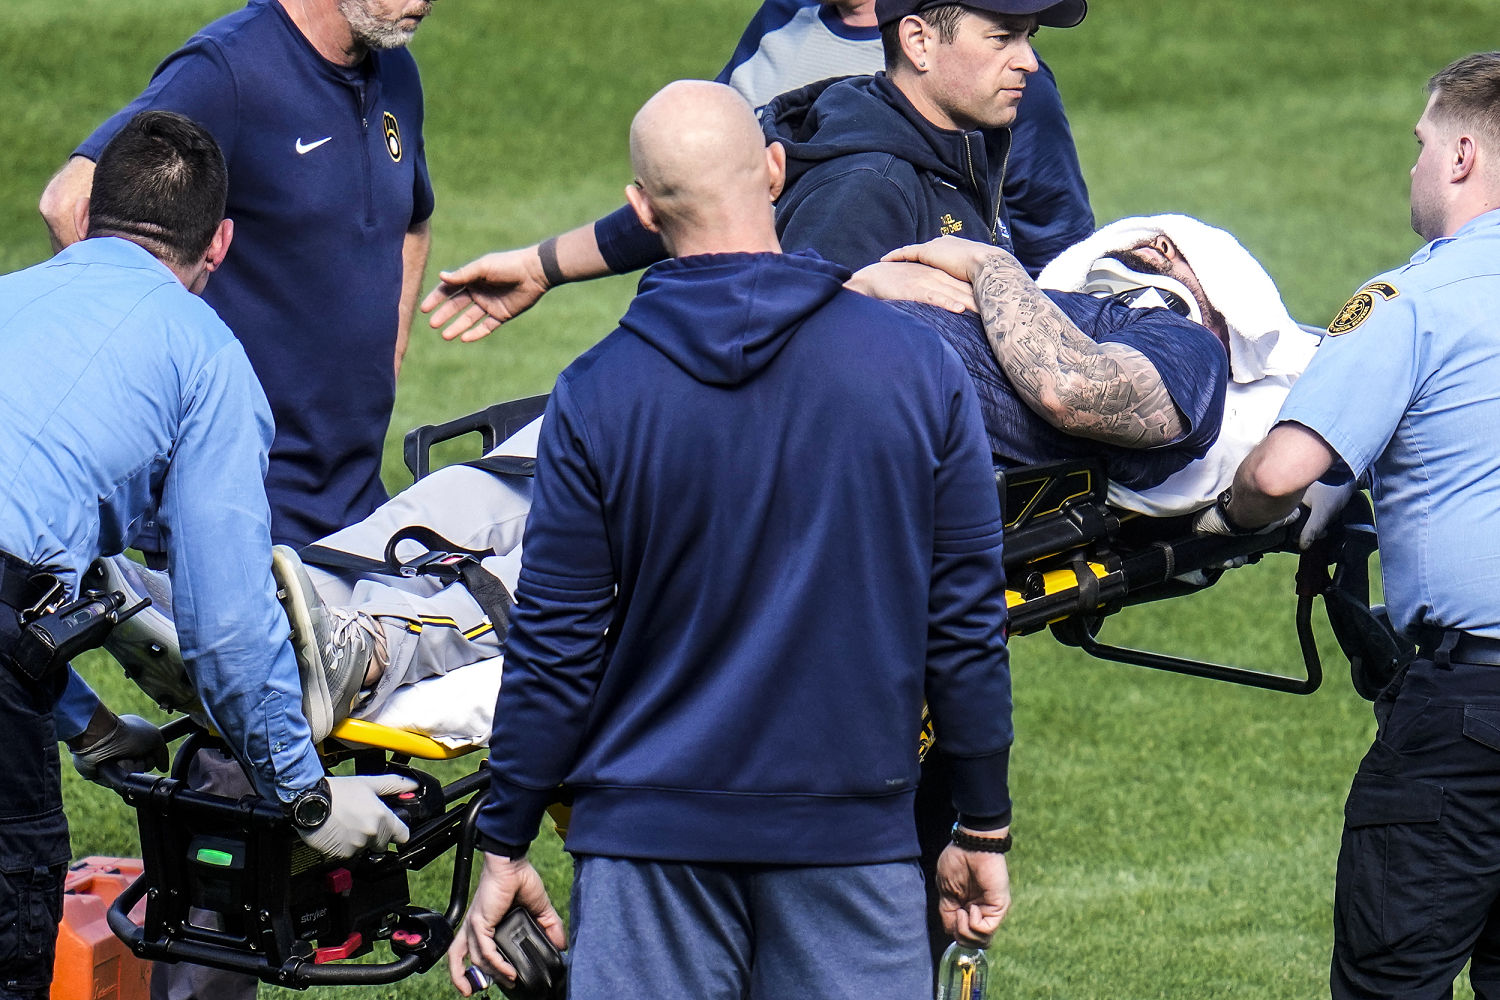 Brewers’ Jakob Junis hit in neck by line drive in batting practice, taken to hospital